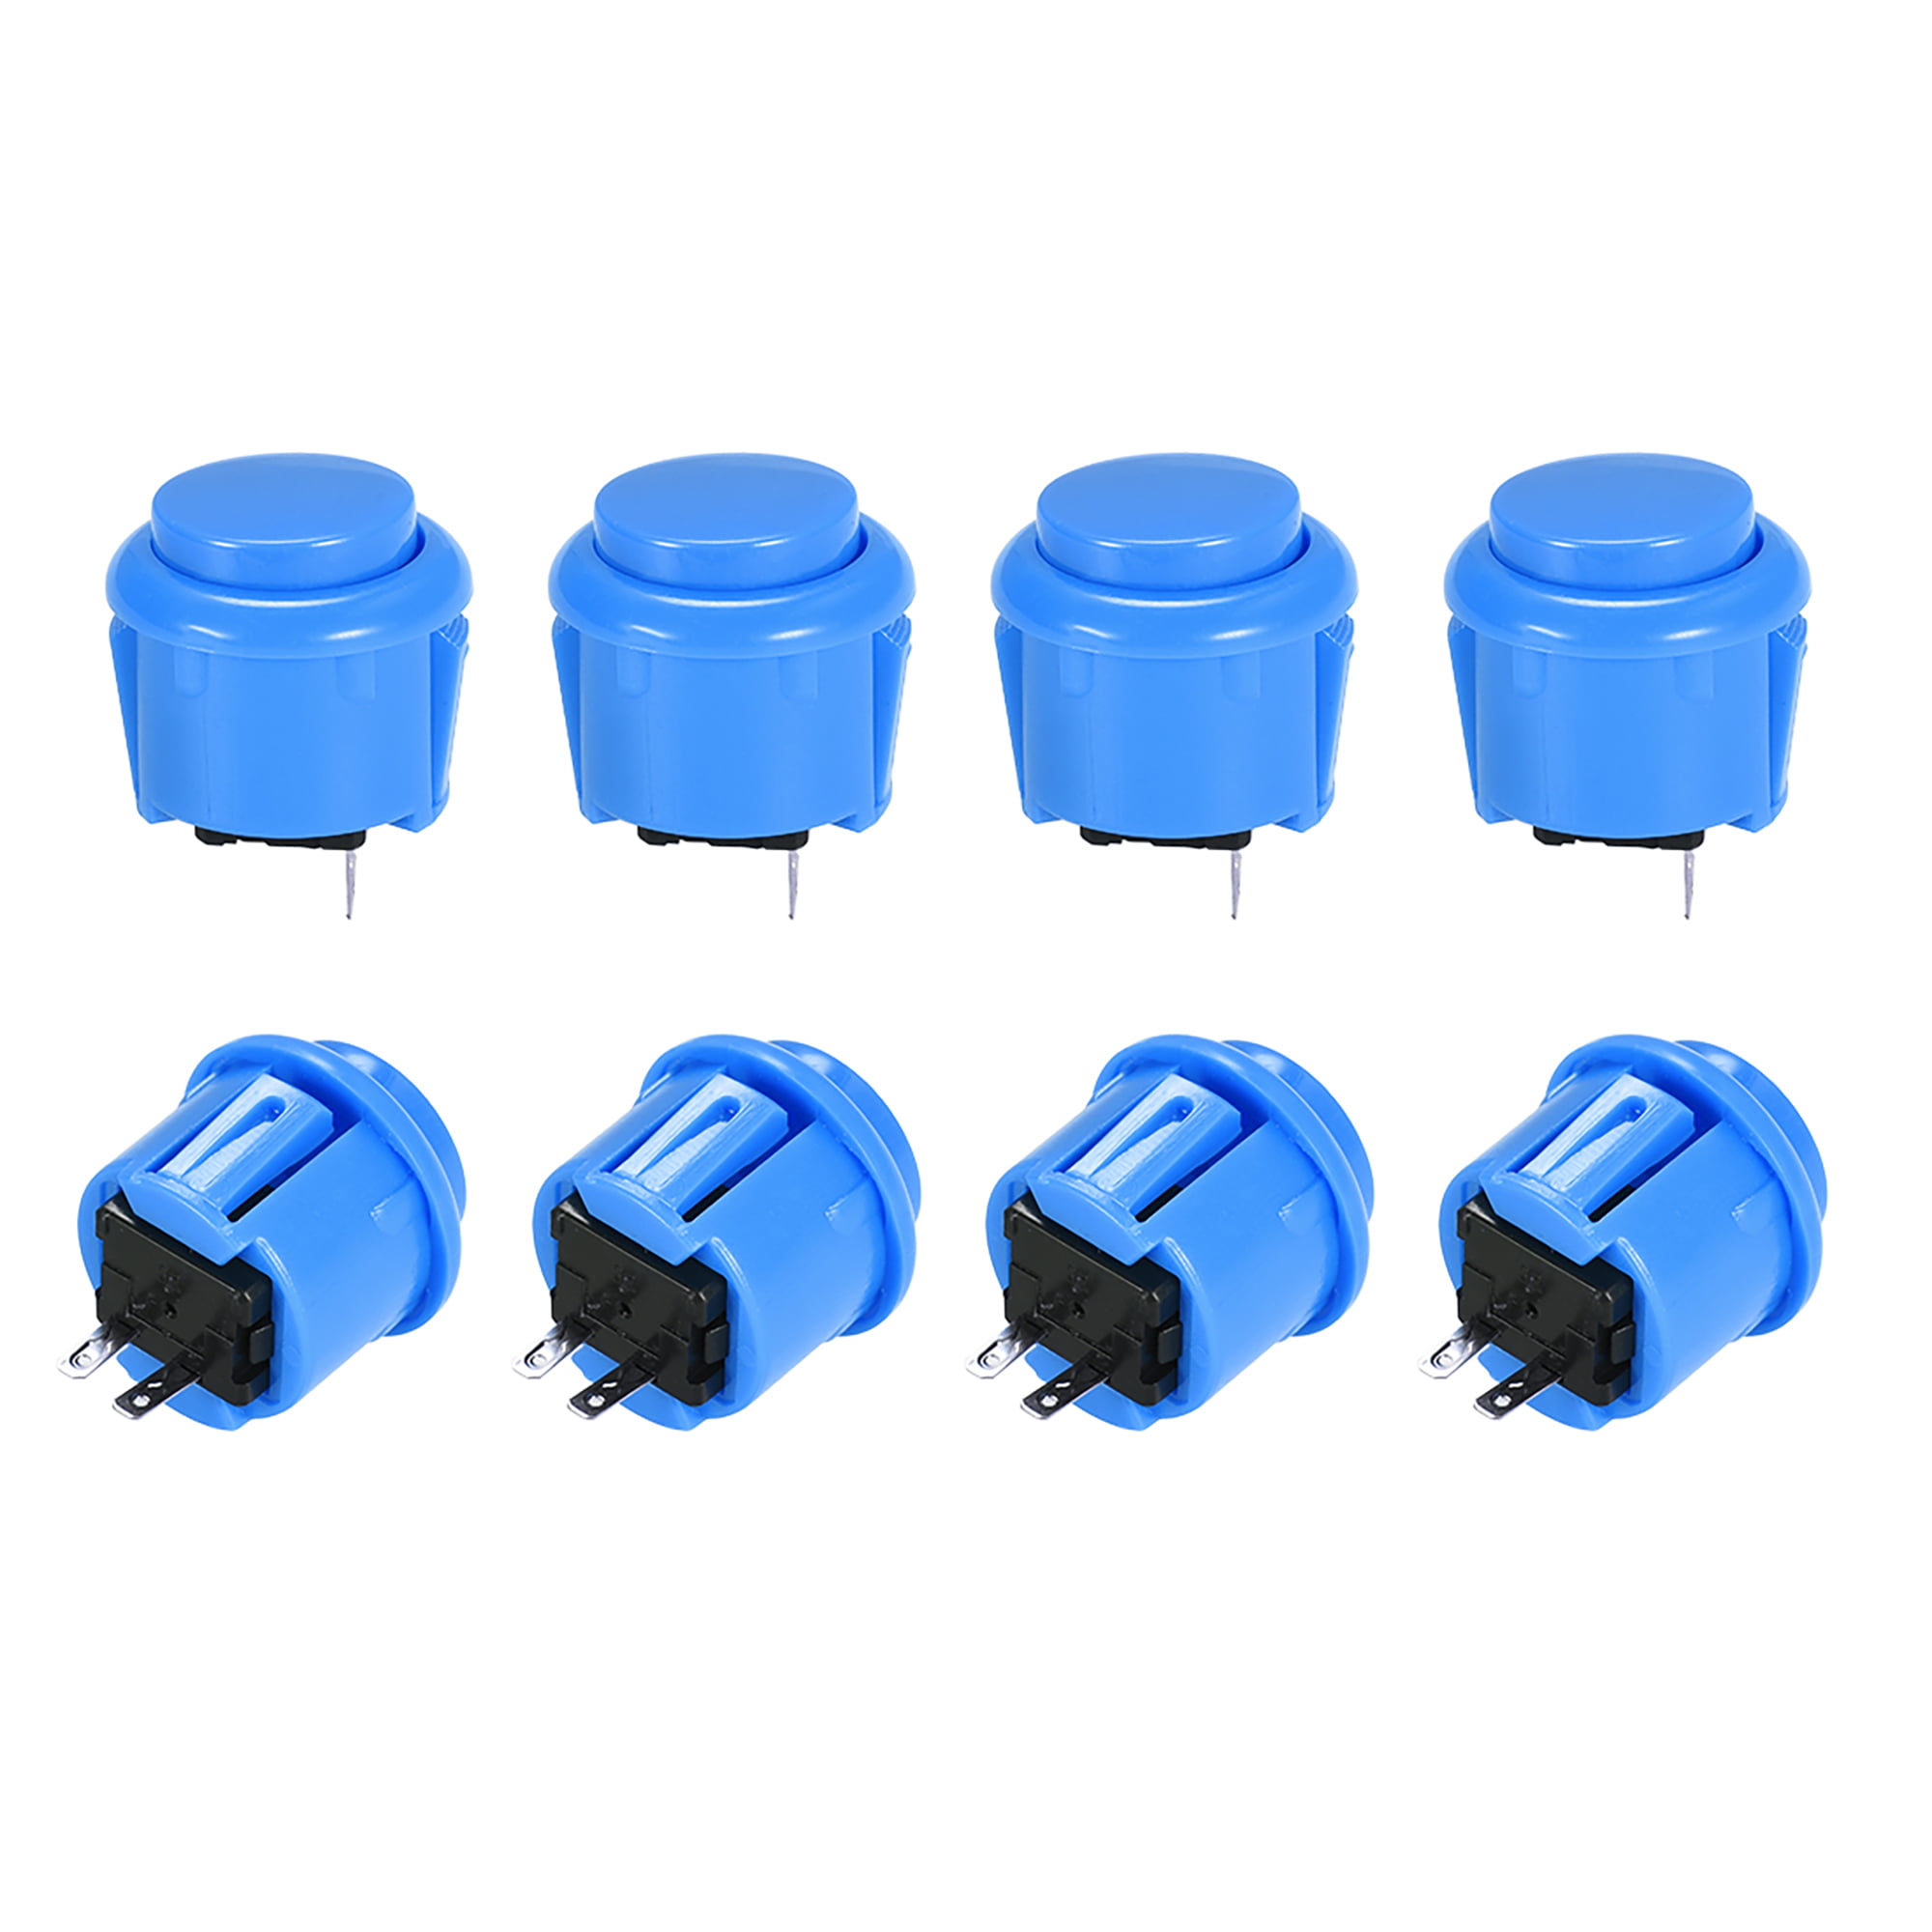 Details about   23mm Momentary Game Push Button Switch for Arcade Video Games Blue 6pcs